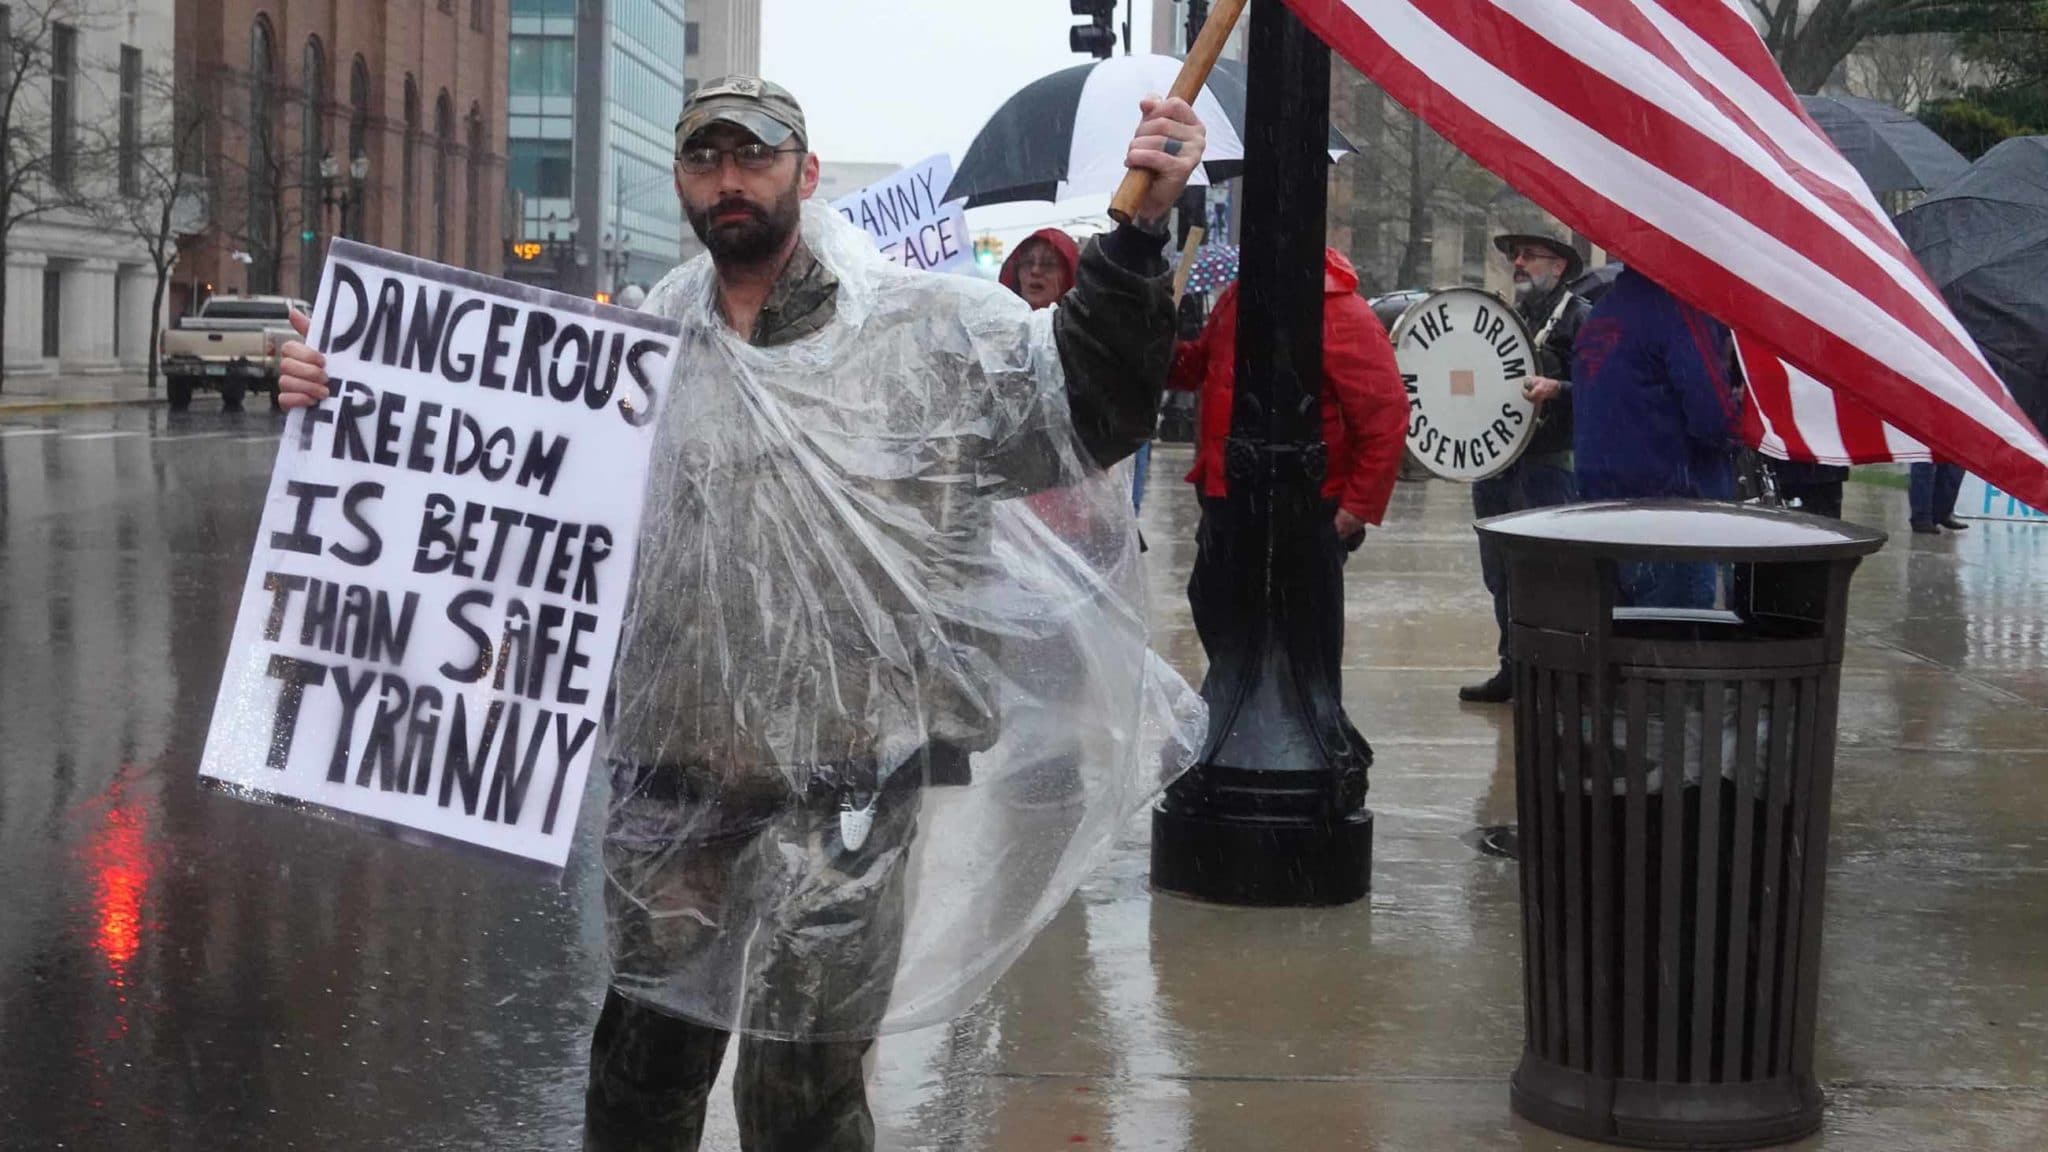 Demonstrators held a rally in front of the Michigan state capital building on Thursday to protest the governor's stay-at-home coronavirus order.